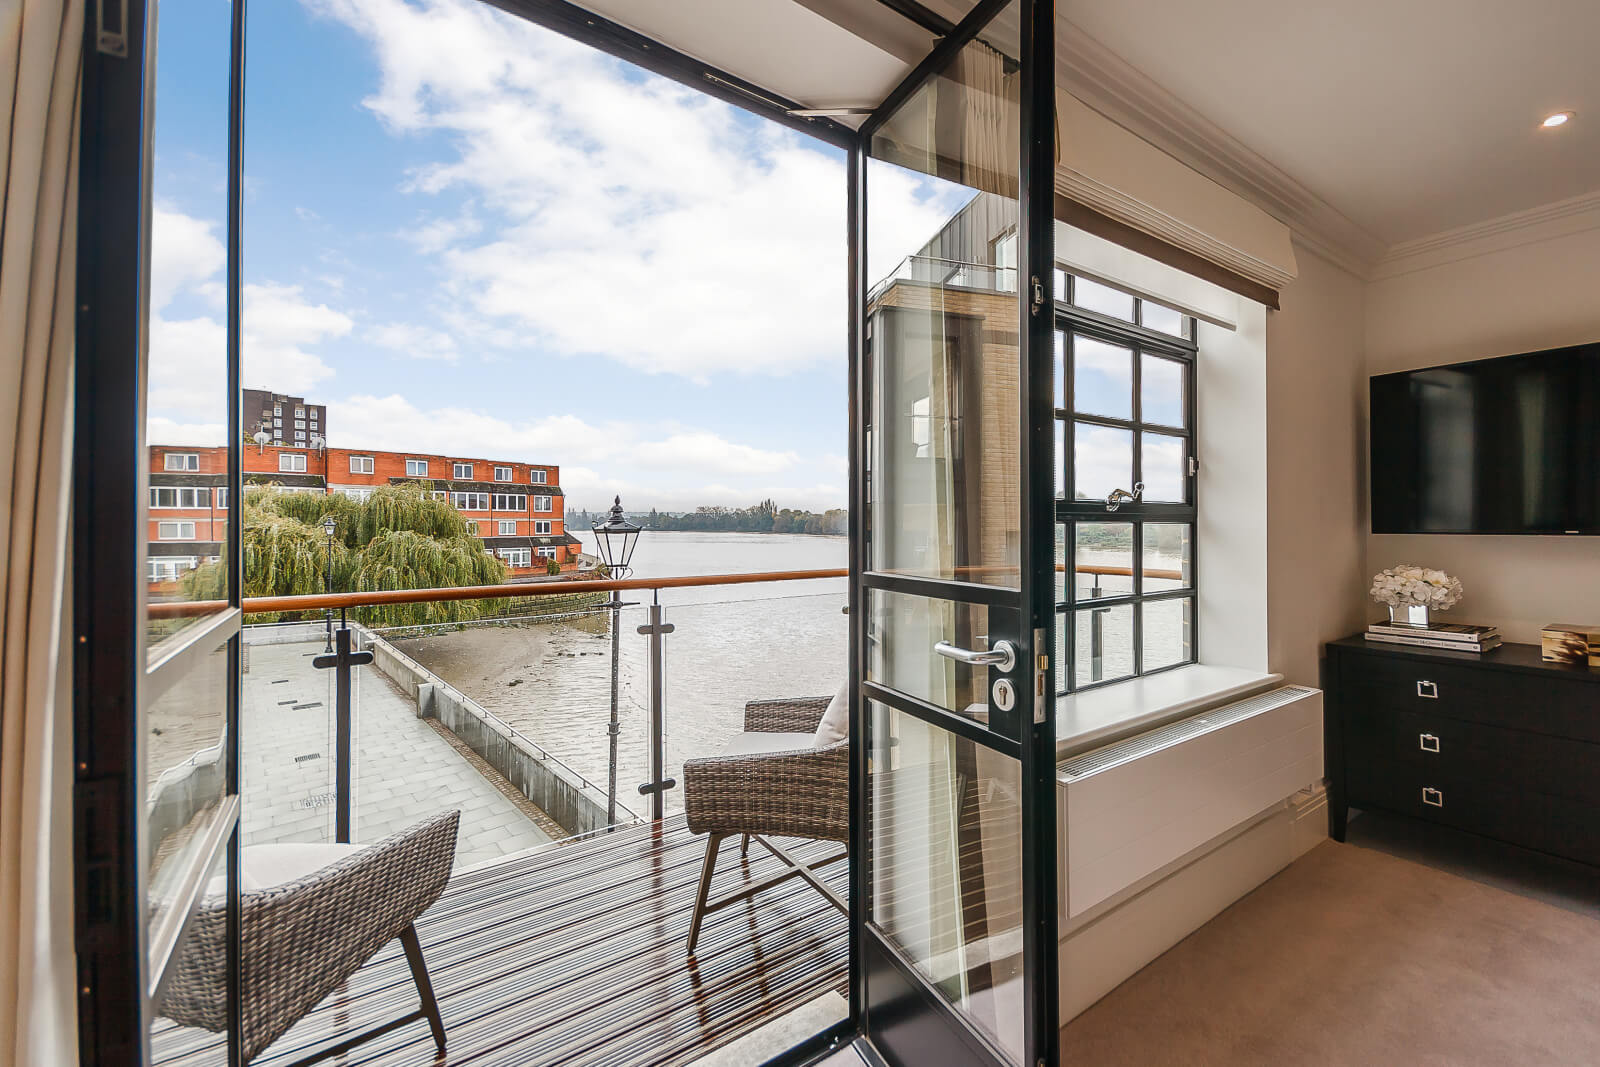 Palace Wharf is a luxurious riverside development in Fulham with stunning views, generous room sizes, and high-end amenities.